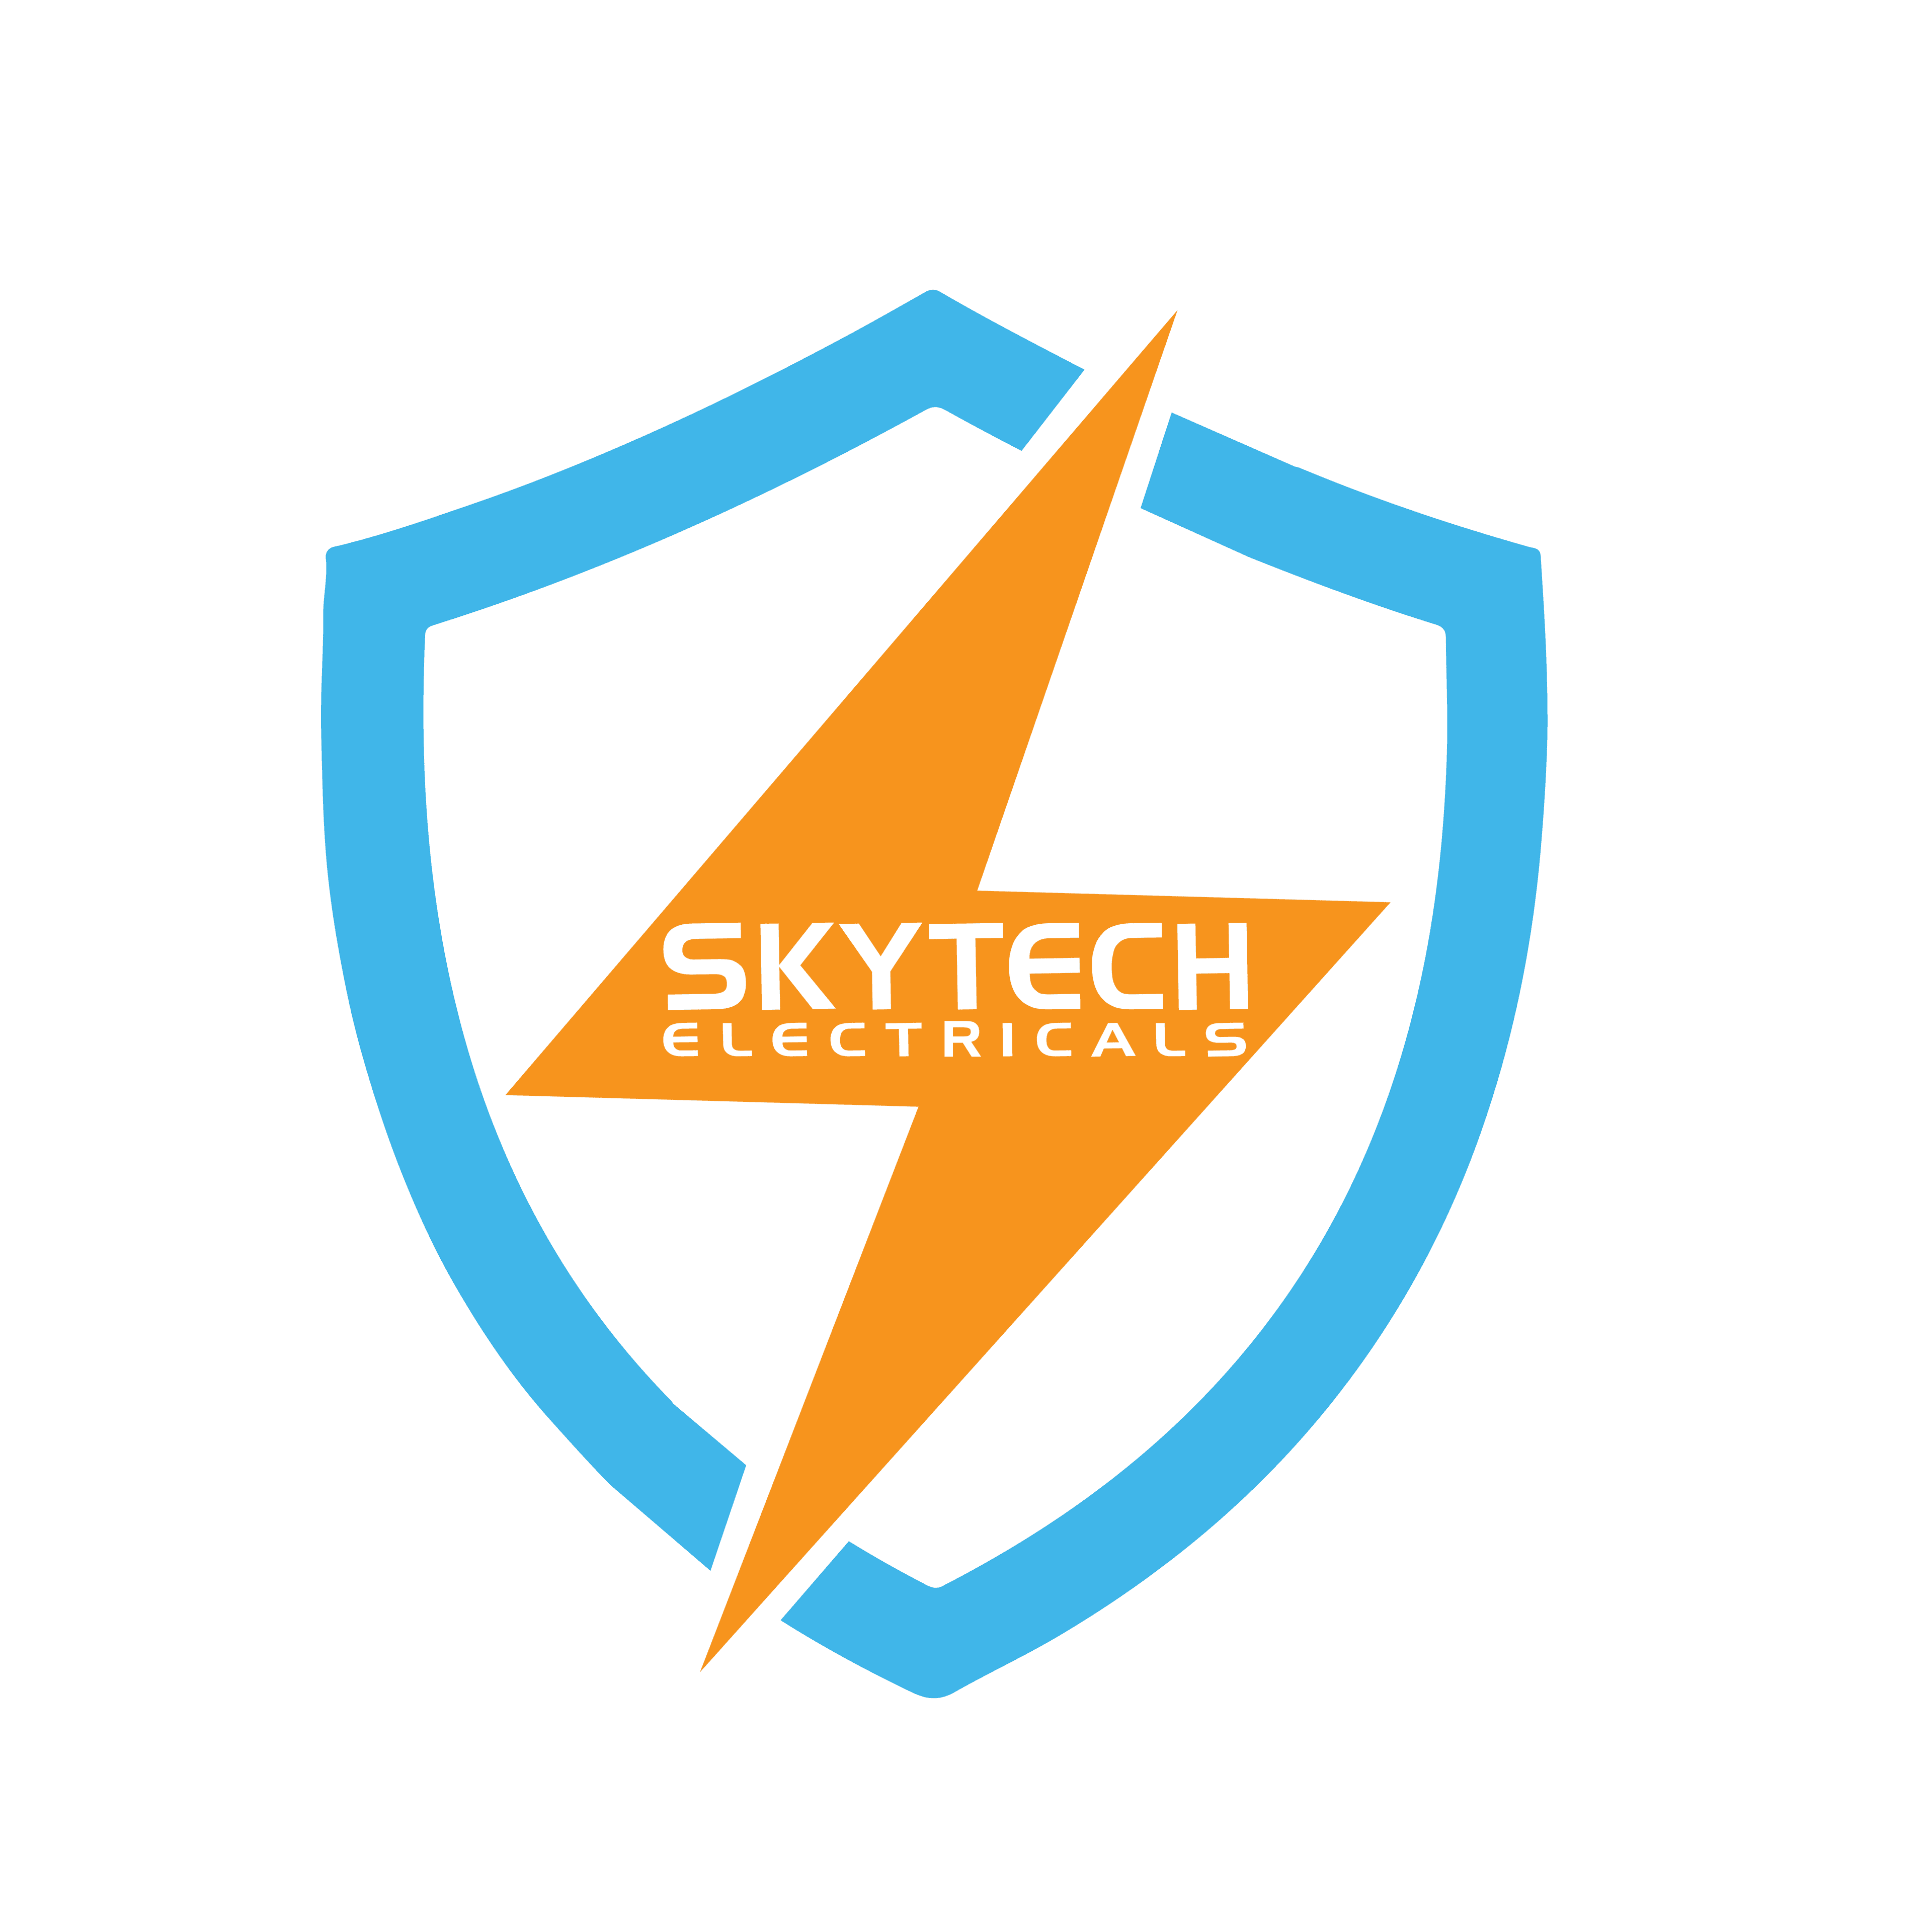 Skytech Electricals